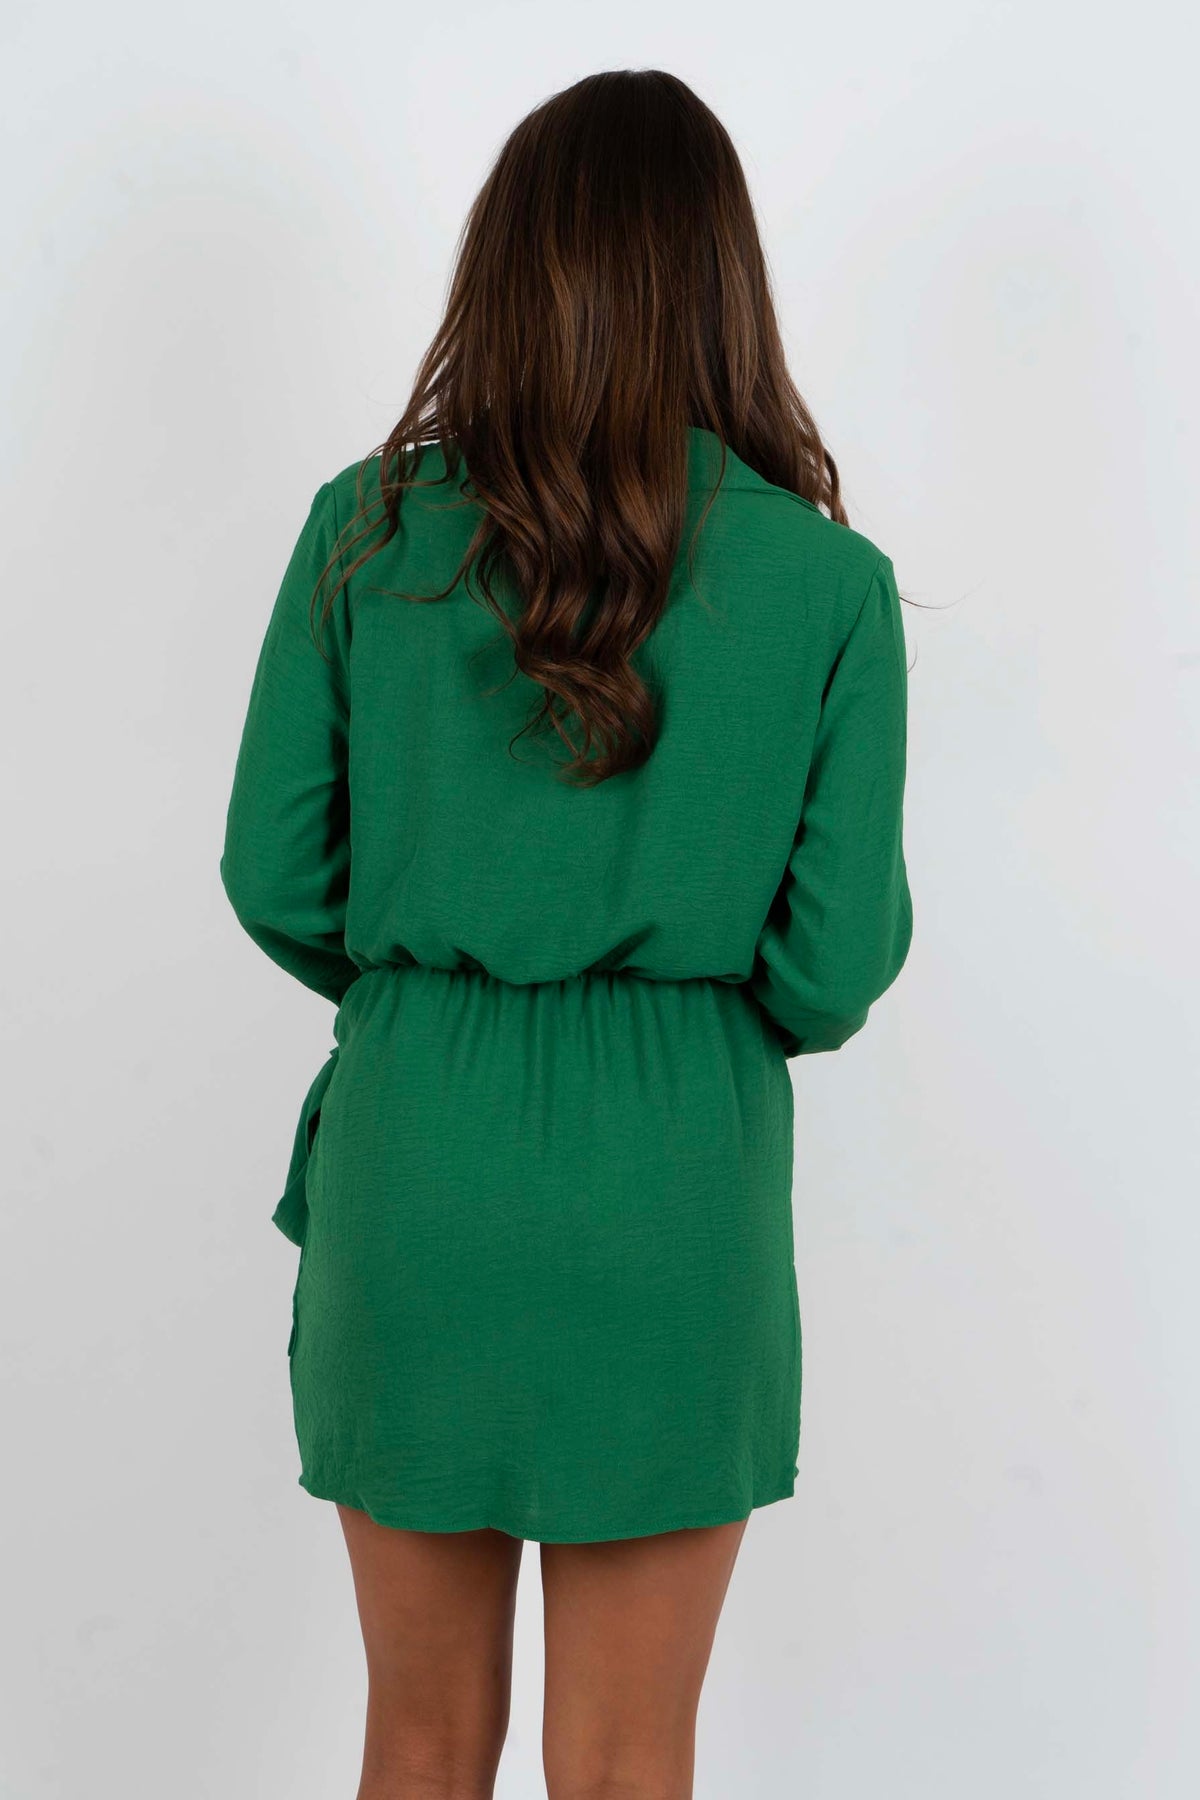 Just For A Moment Dress (Kelly Green)